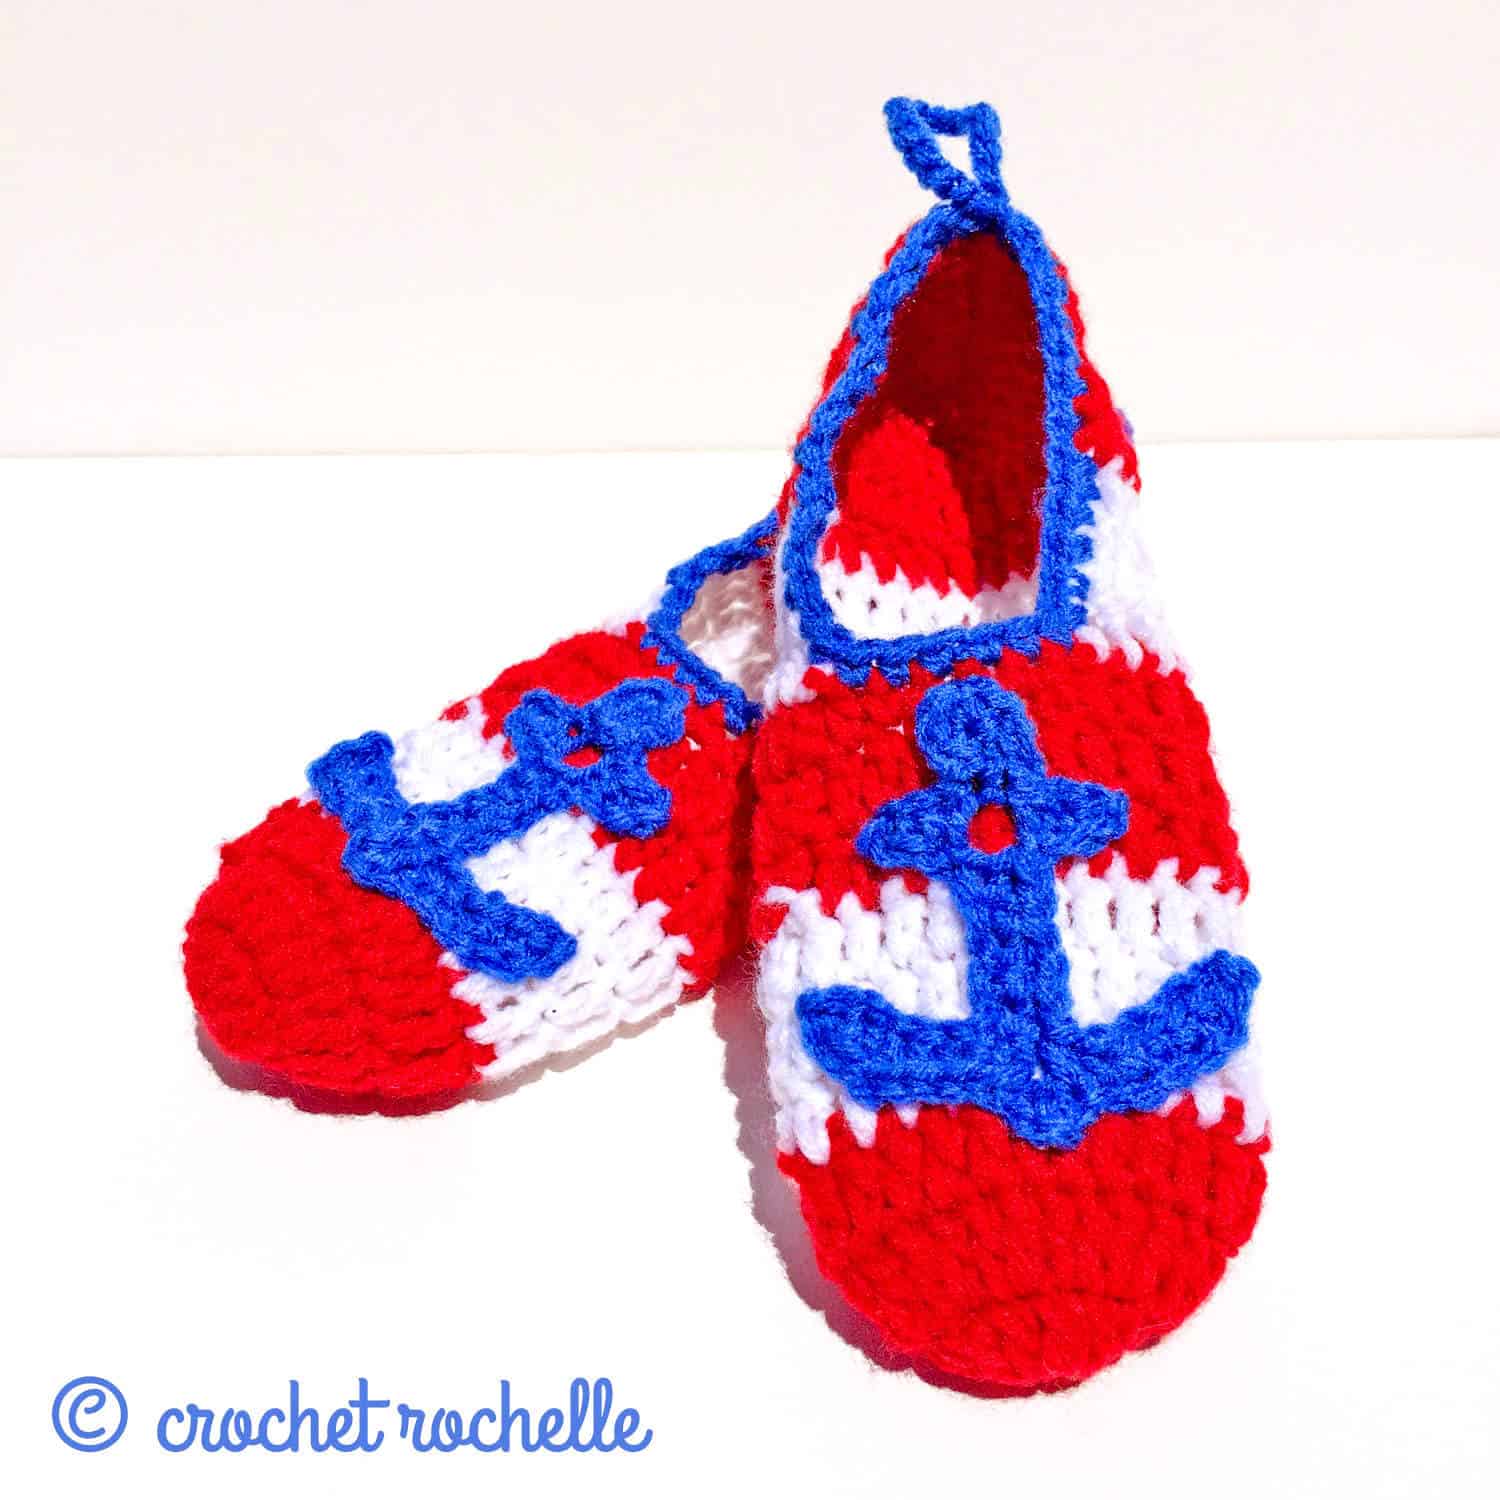 The comfort of handmade slippers can’t be beat. We’ve rounded up 20 of the most adorable, comfortable & cozy free crochet slipper patterns perfect for fall. Crochet a set of these slippers for every member of the family and put a few aside for guests, too!